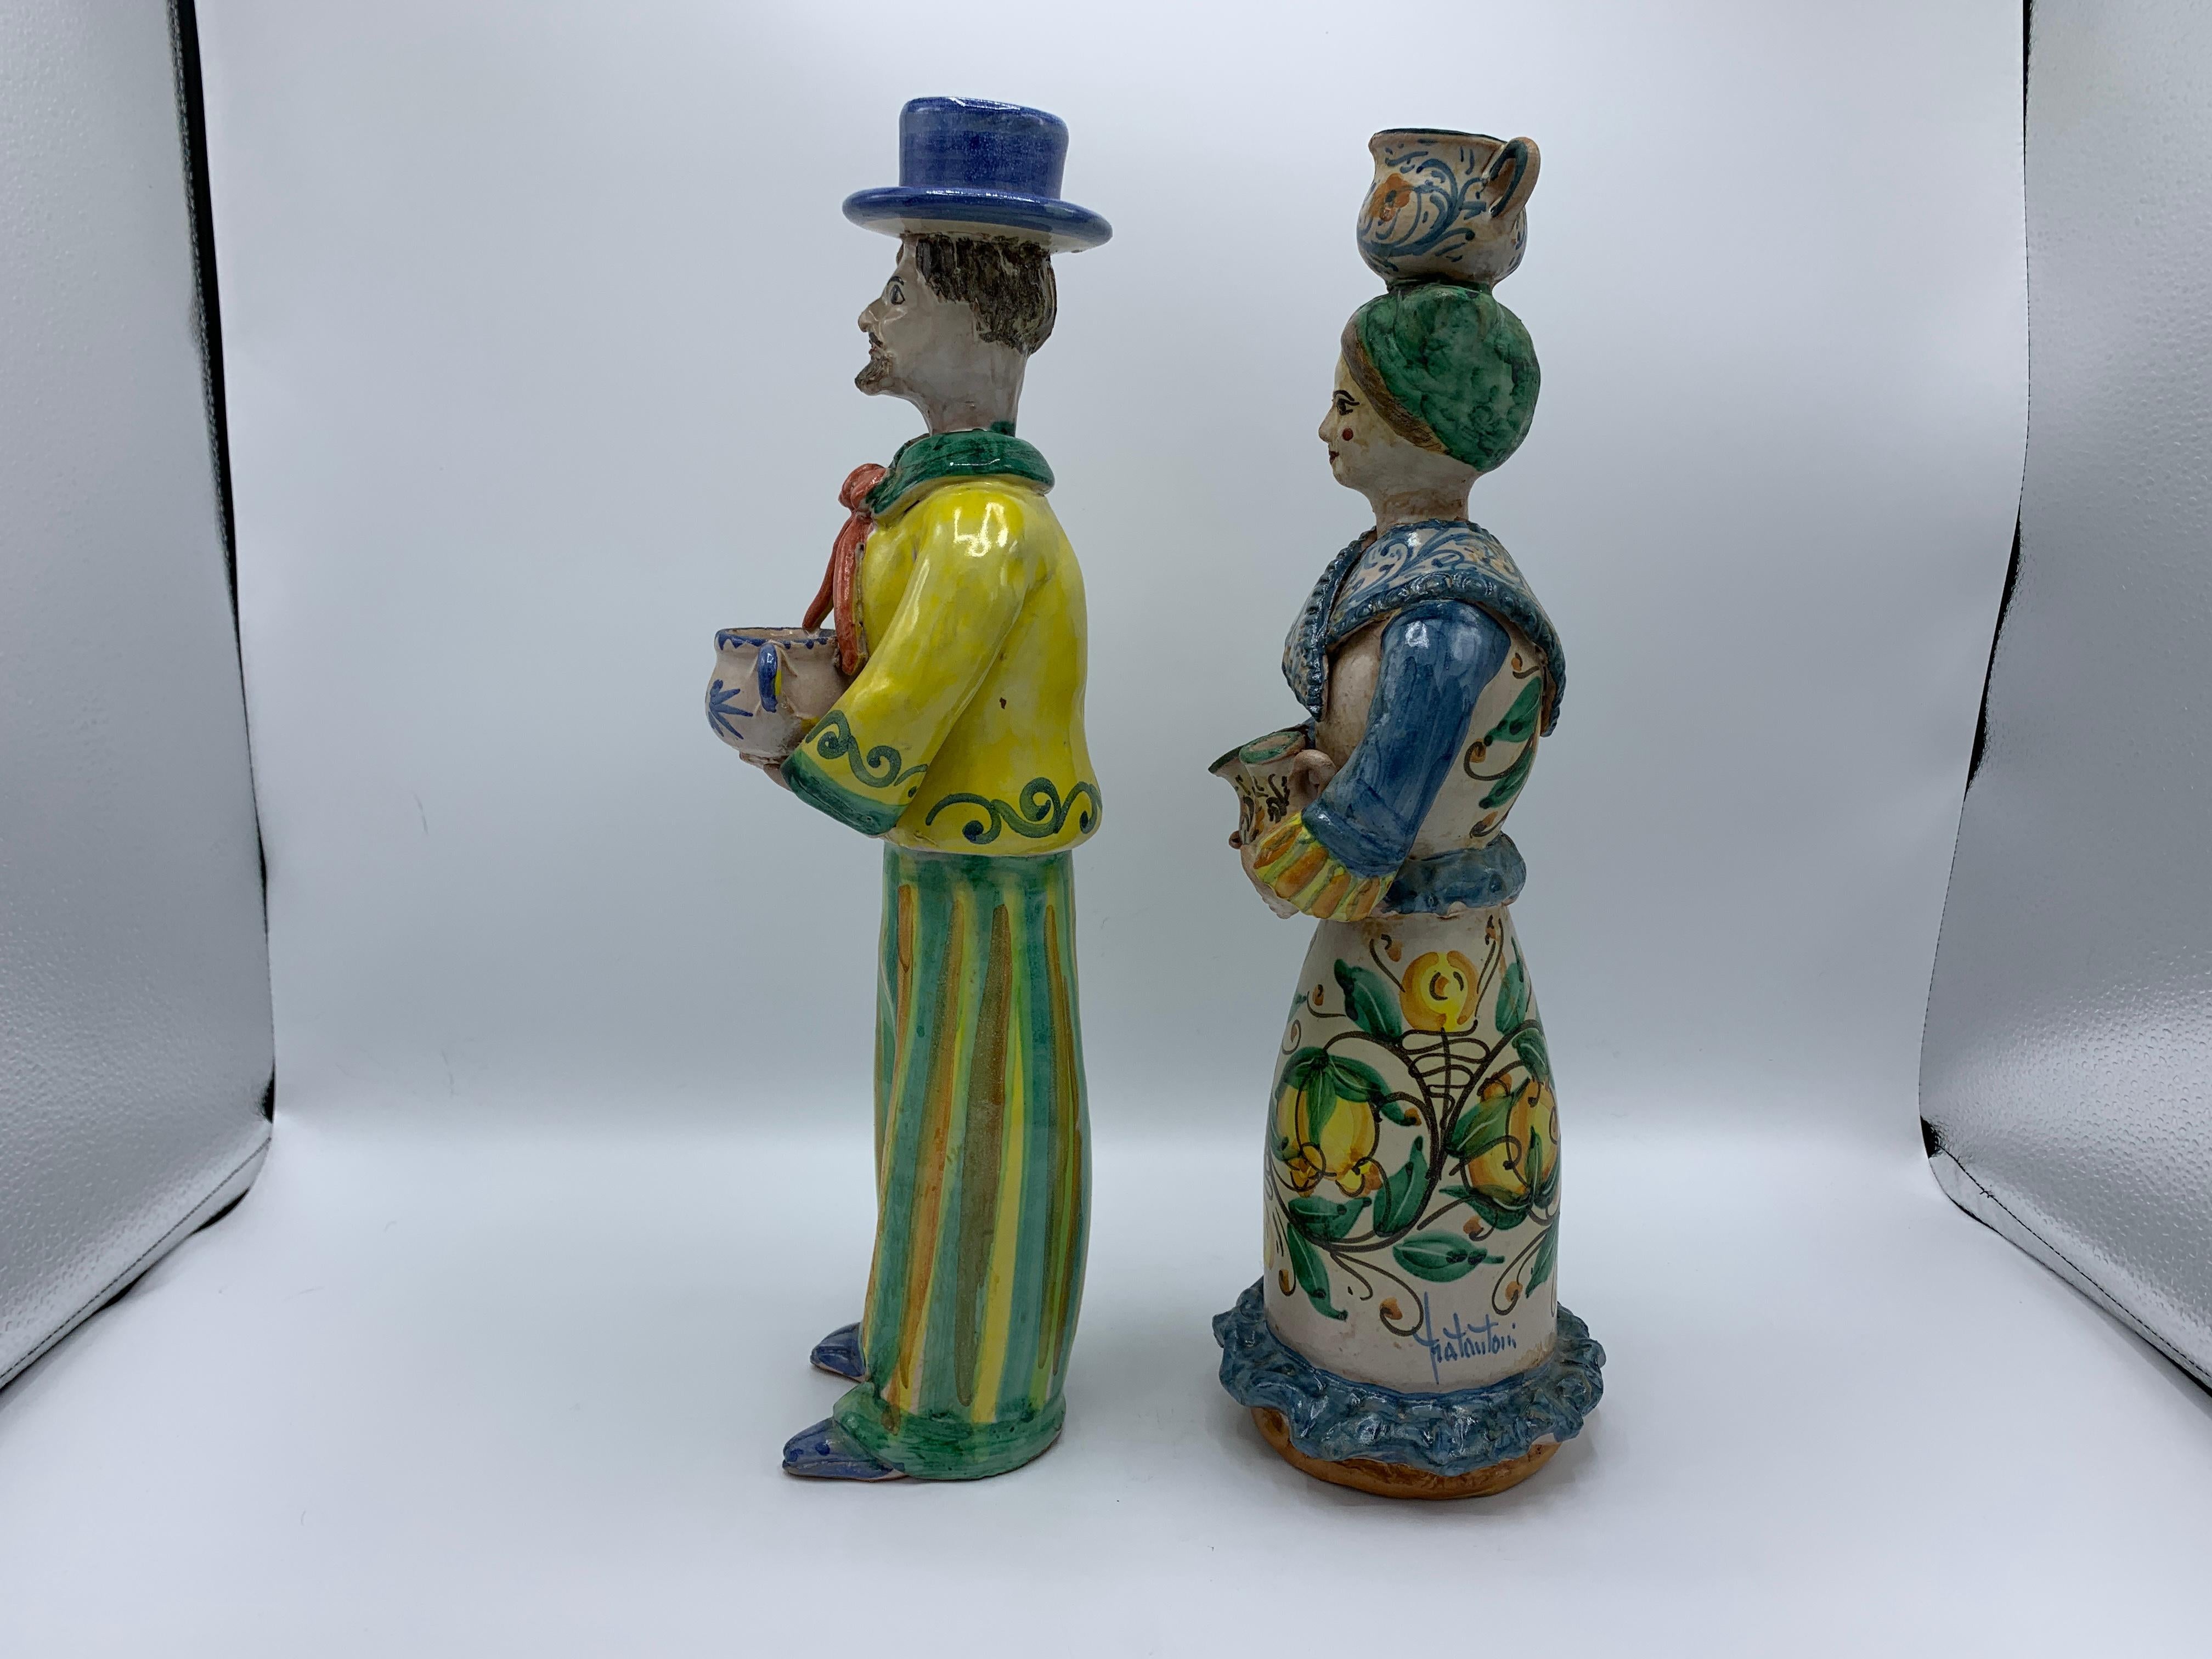 Listed is a beautiful, pair of 1960s Italian polychrome terracotta pottery sculptures, for Vietri. The pair are of amazing quality and attention to detail.

Heavy, weighing 4.5lbs each - 9lbs for the pair.

Varying heights.
Male: 3.5in D x